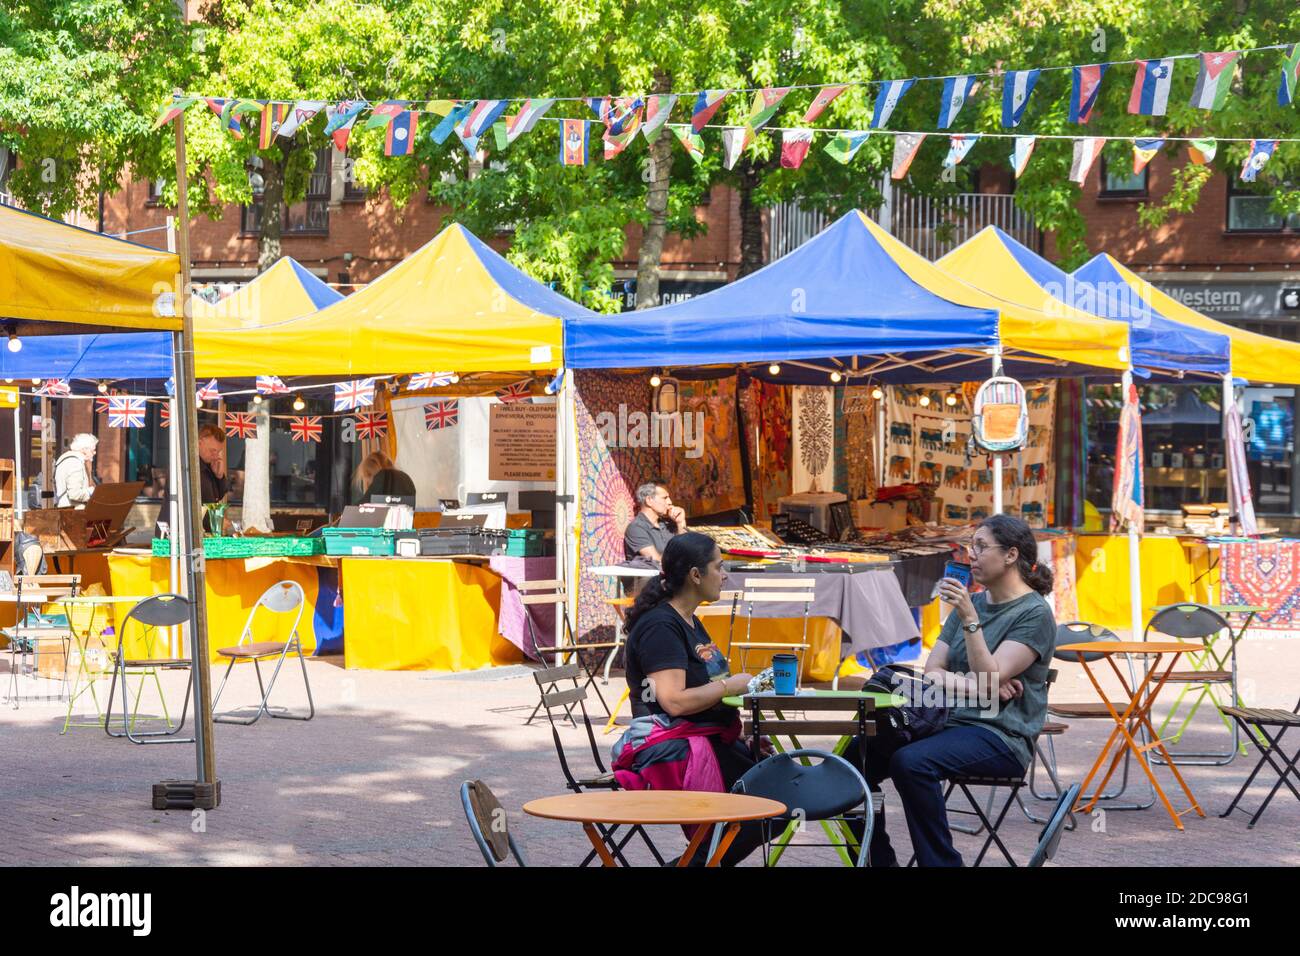 Gloucester Green Outdoor Market, Gloucester Green Town Square, Oxford, Oxfordshire, England, United Kingdom Stock Photo